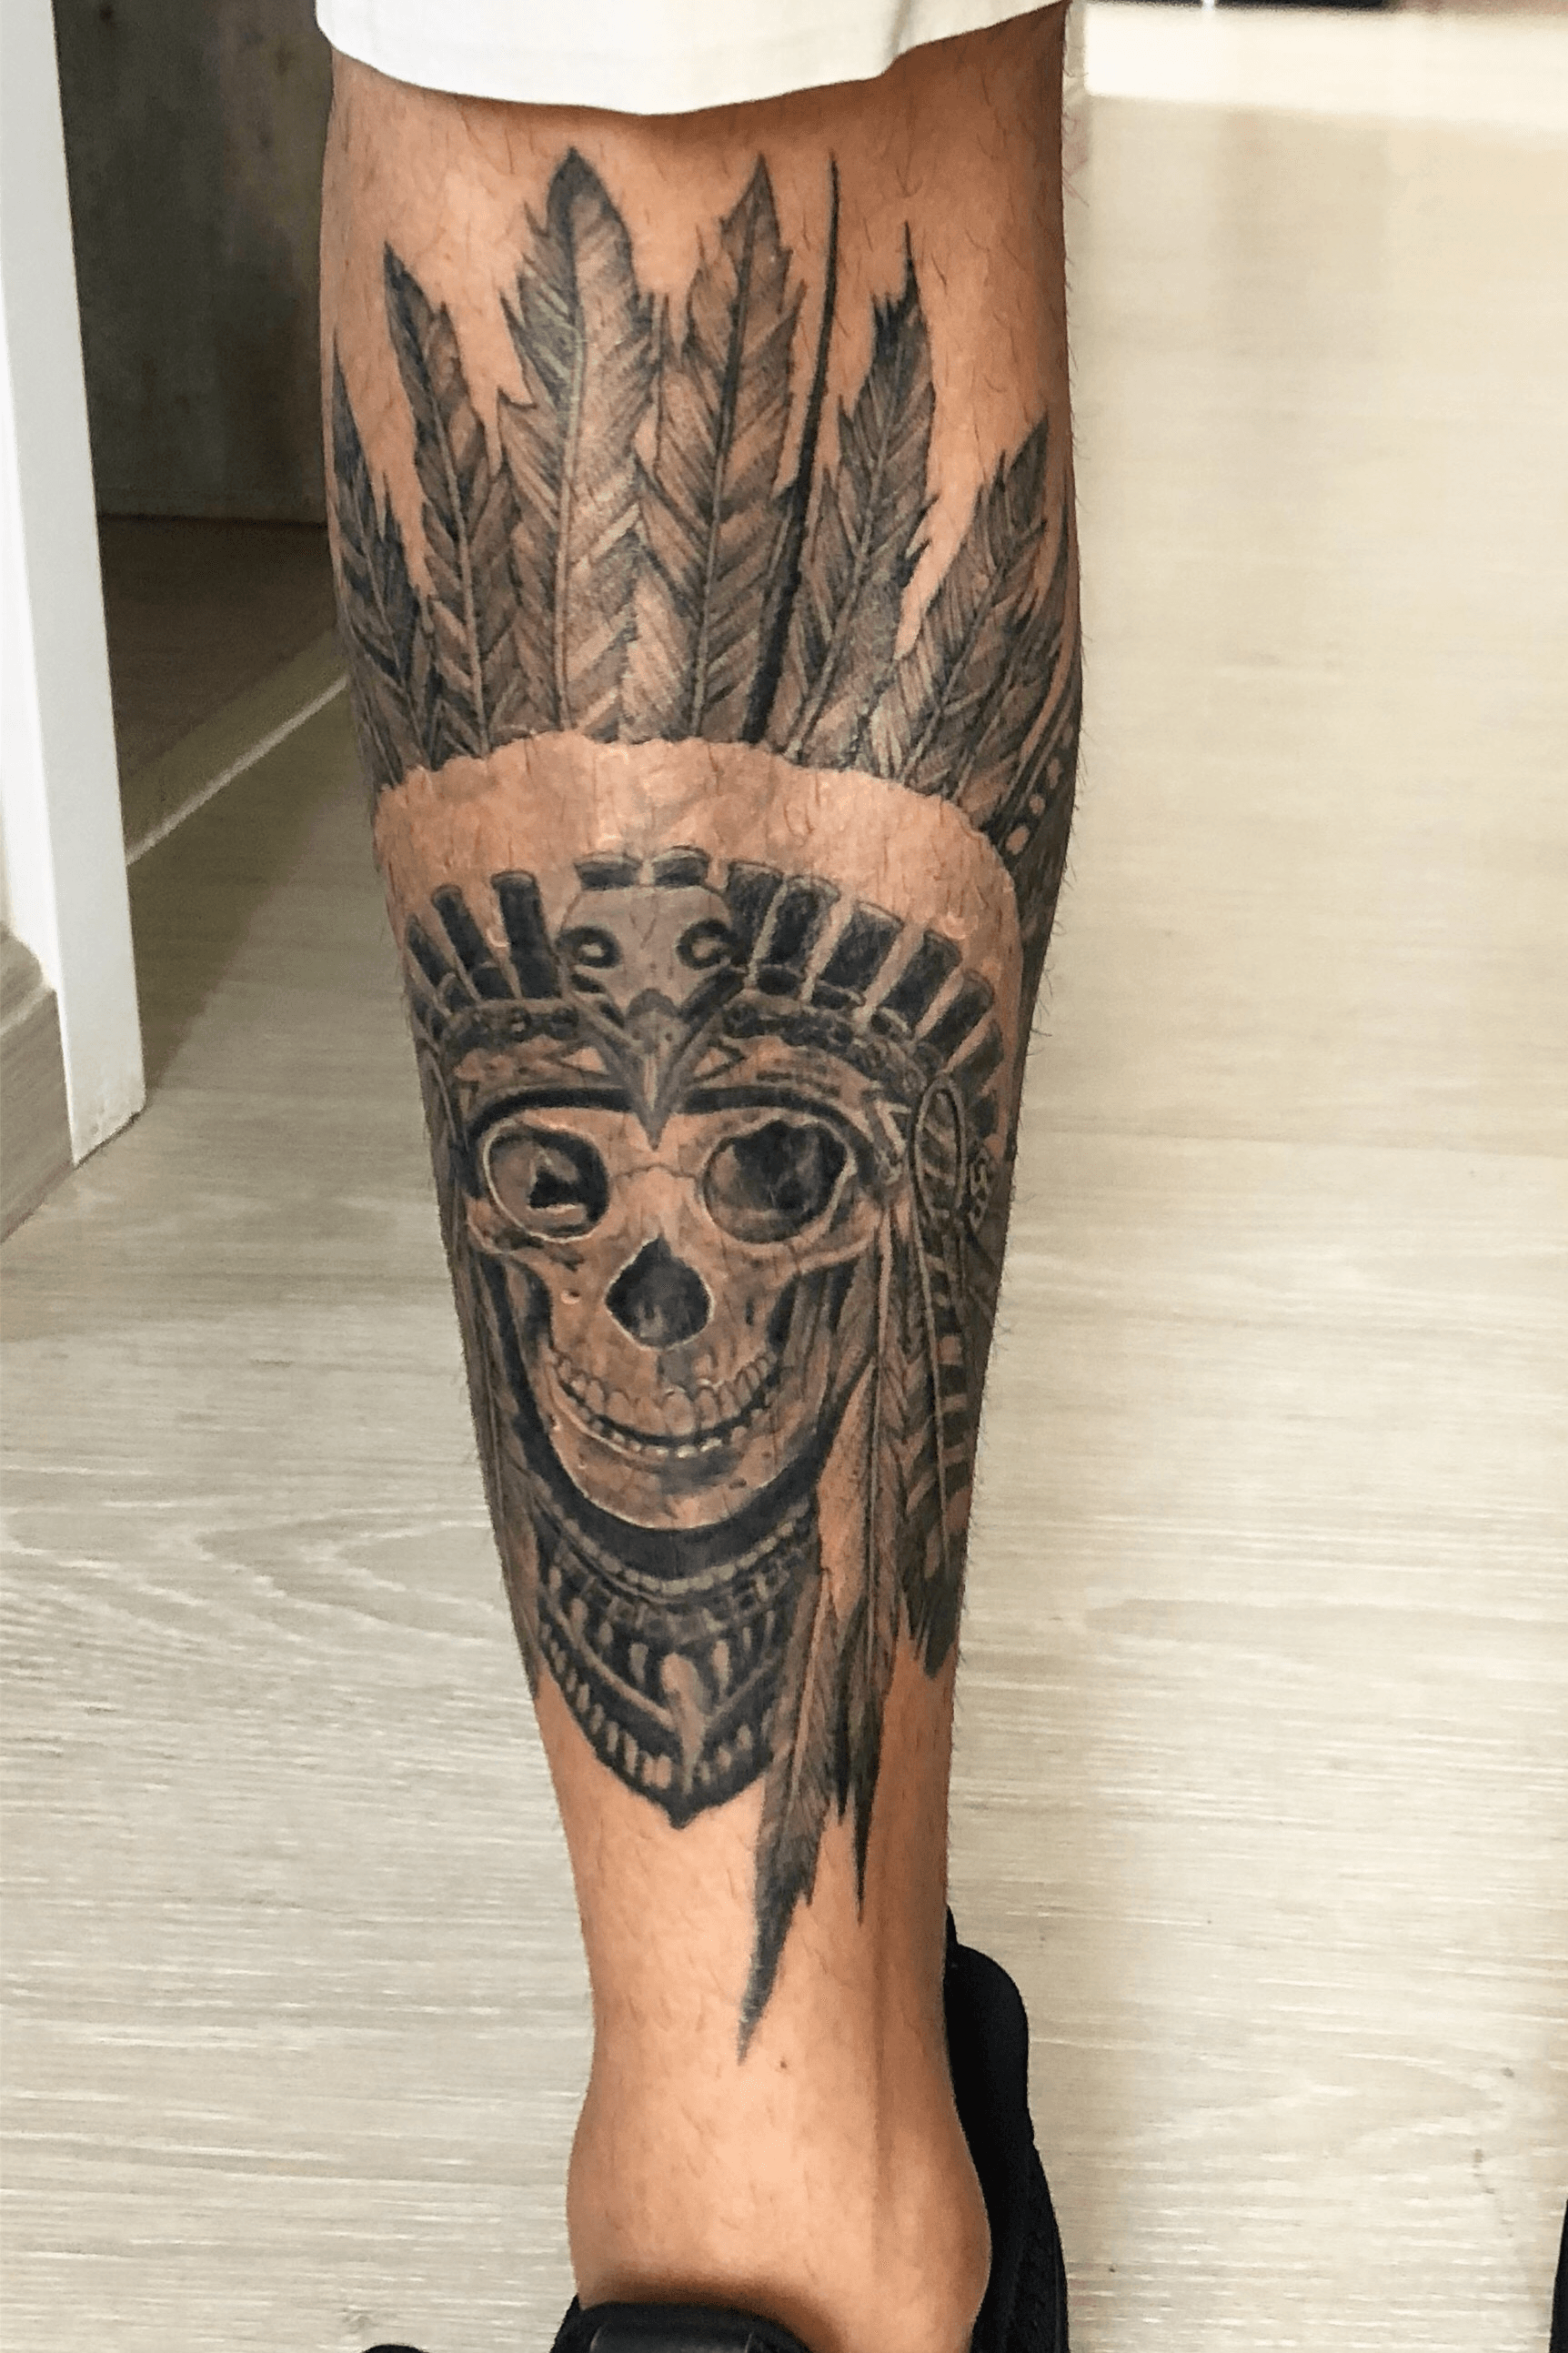 Jay Slaven Tattoos  Got to add this sweet skull and flowers to an existing  leg piece Pretty sure its gonna be a leg sleeve by the time we are done  Thanks